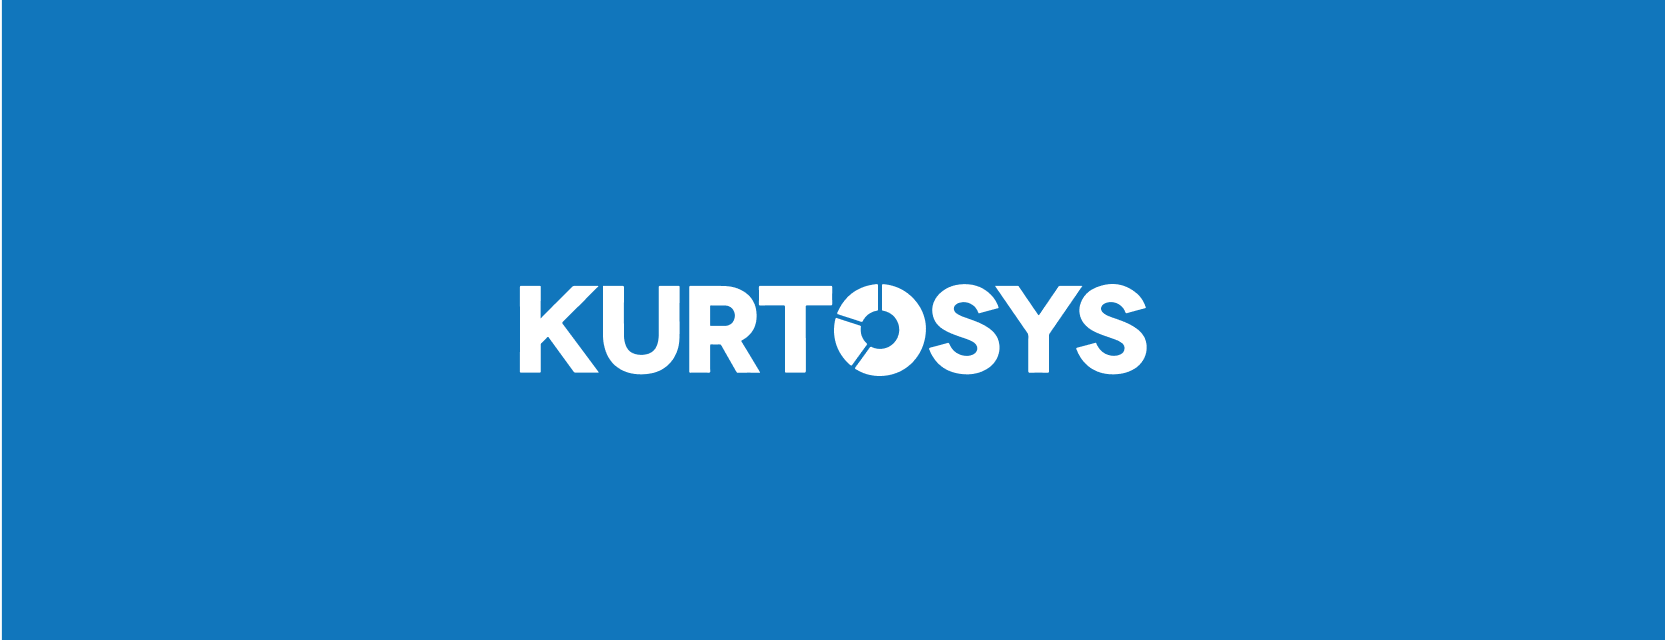 Case Study: Kurtosys &#8211; Why Would I Store My Data In More Than One Database?